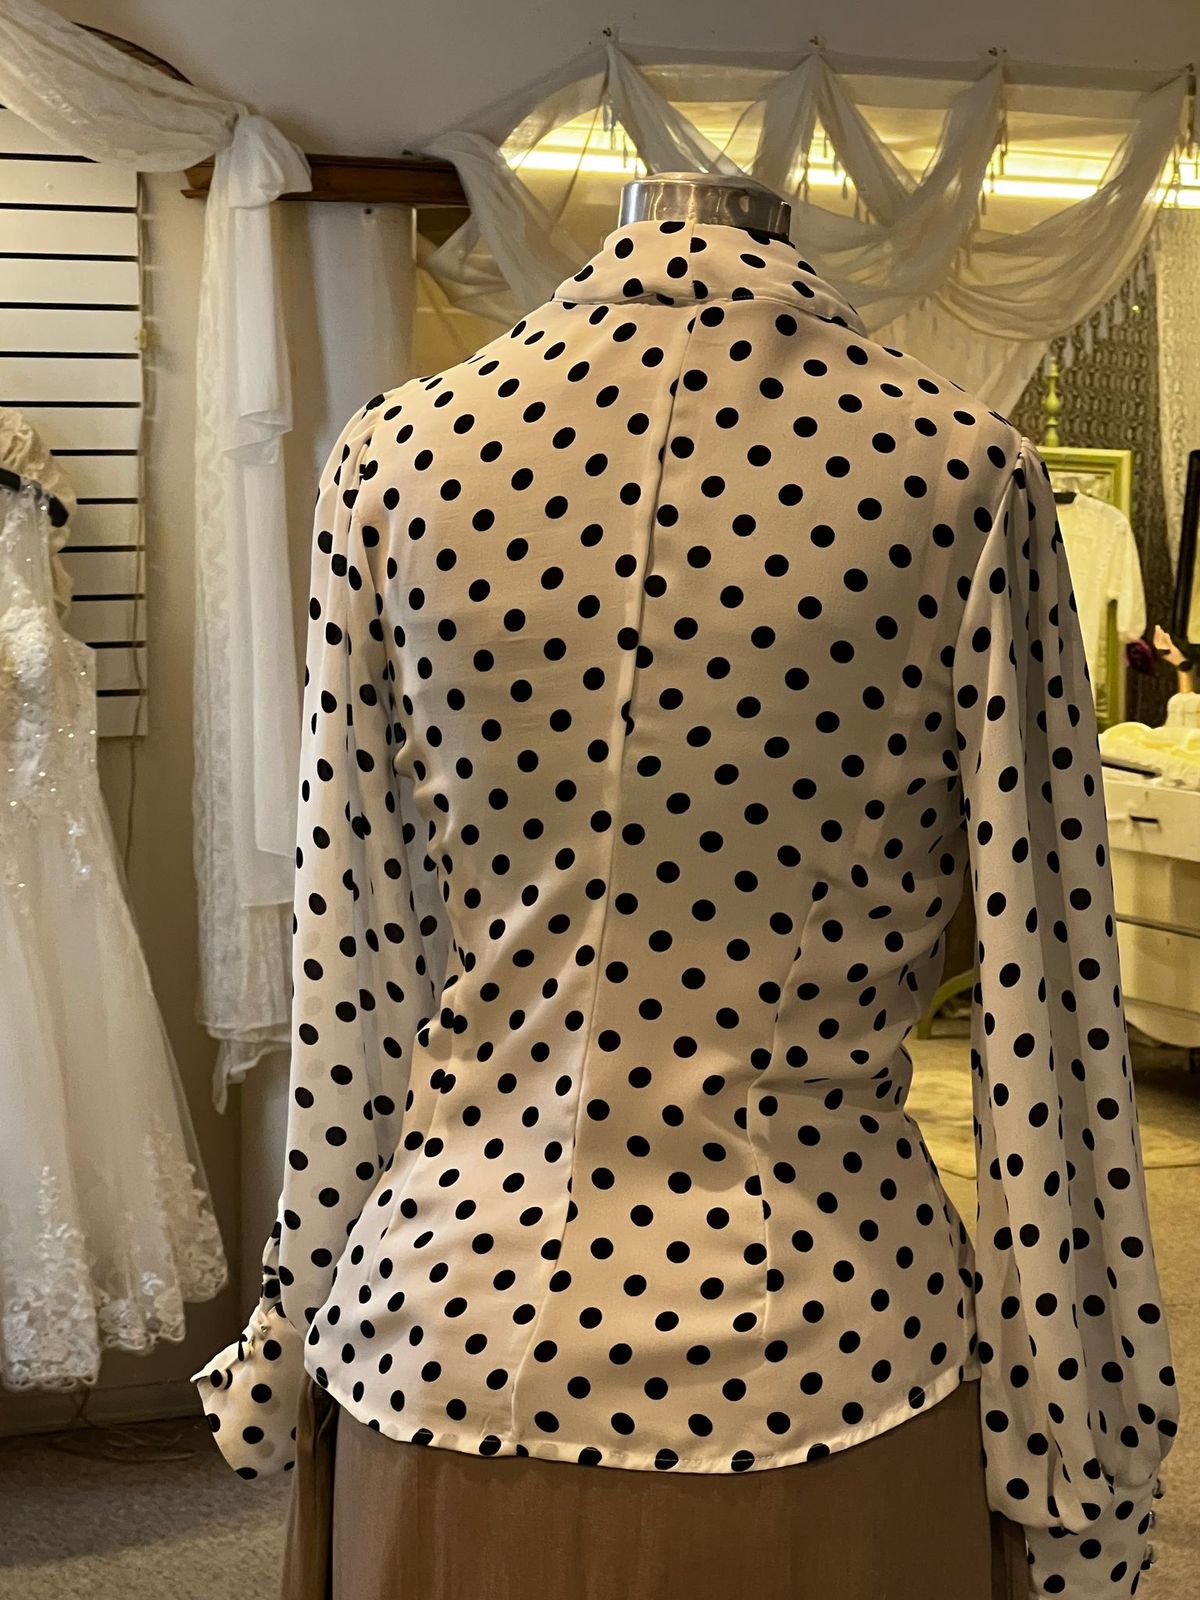 1940s and 50s inspired blouse with polka dotsback